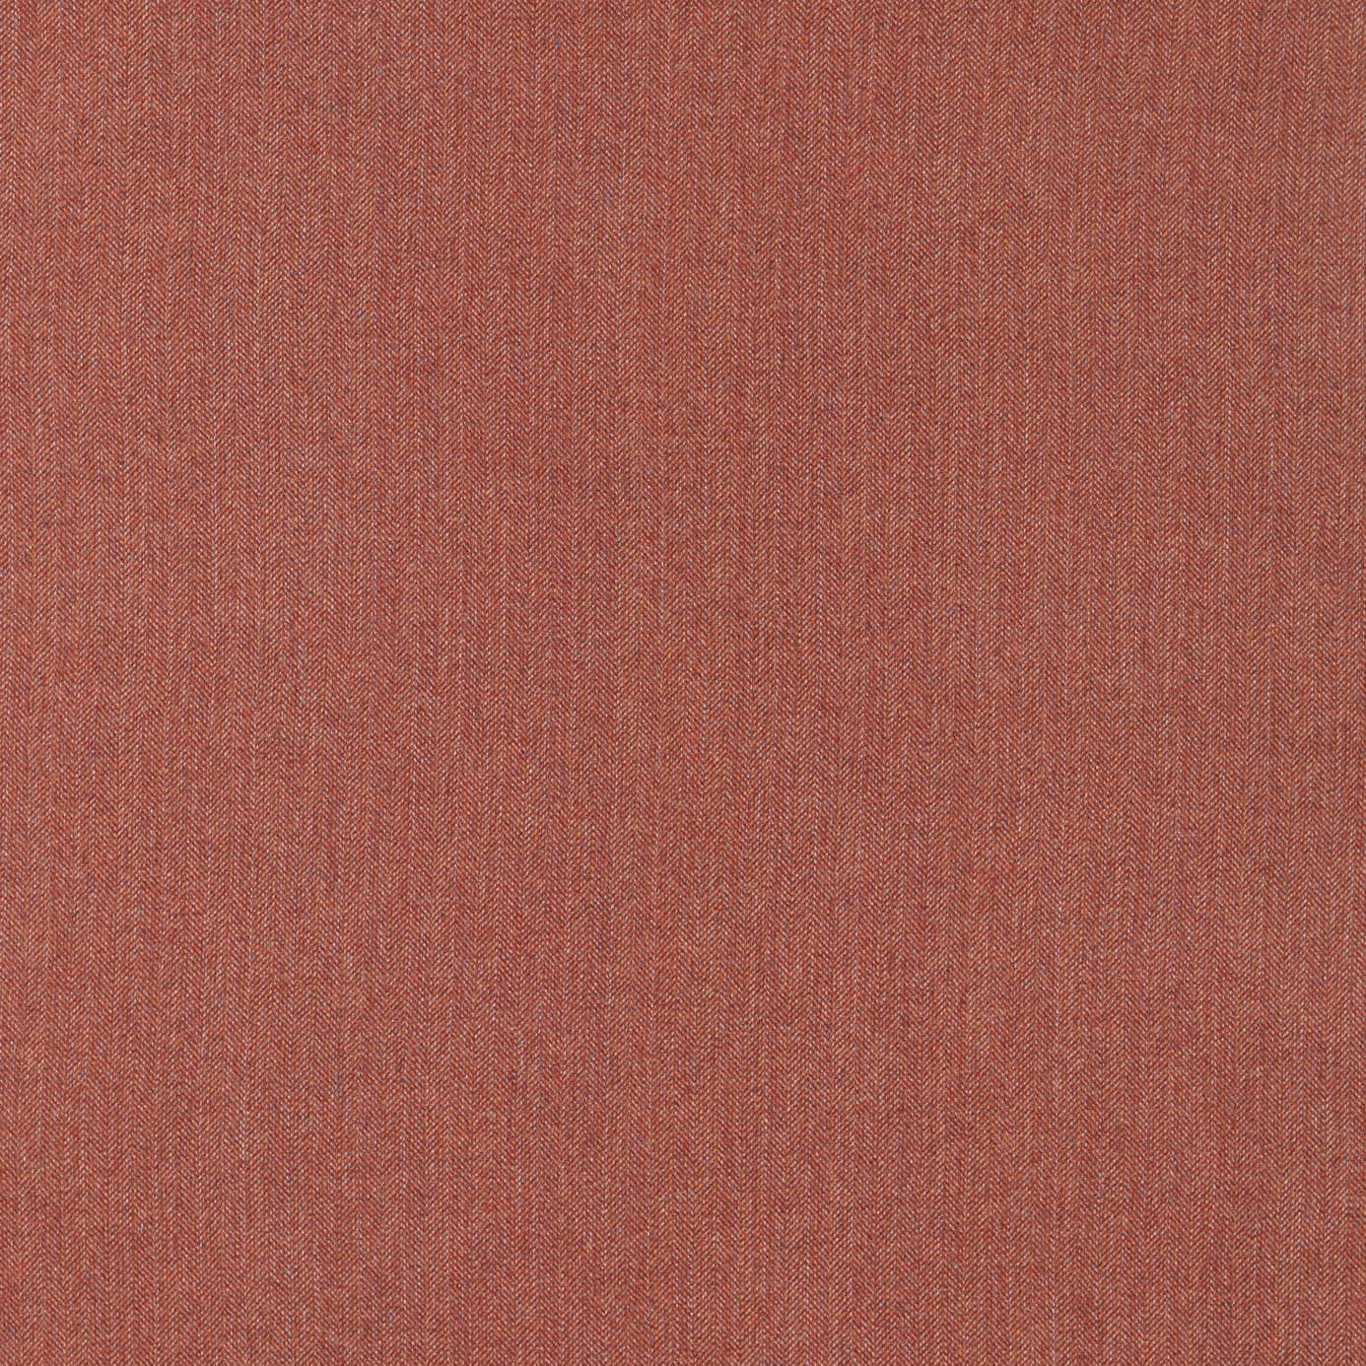 Hector Russet Fabric by SAN